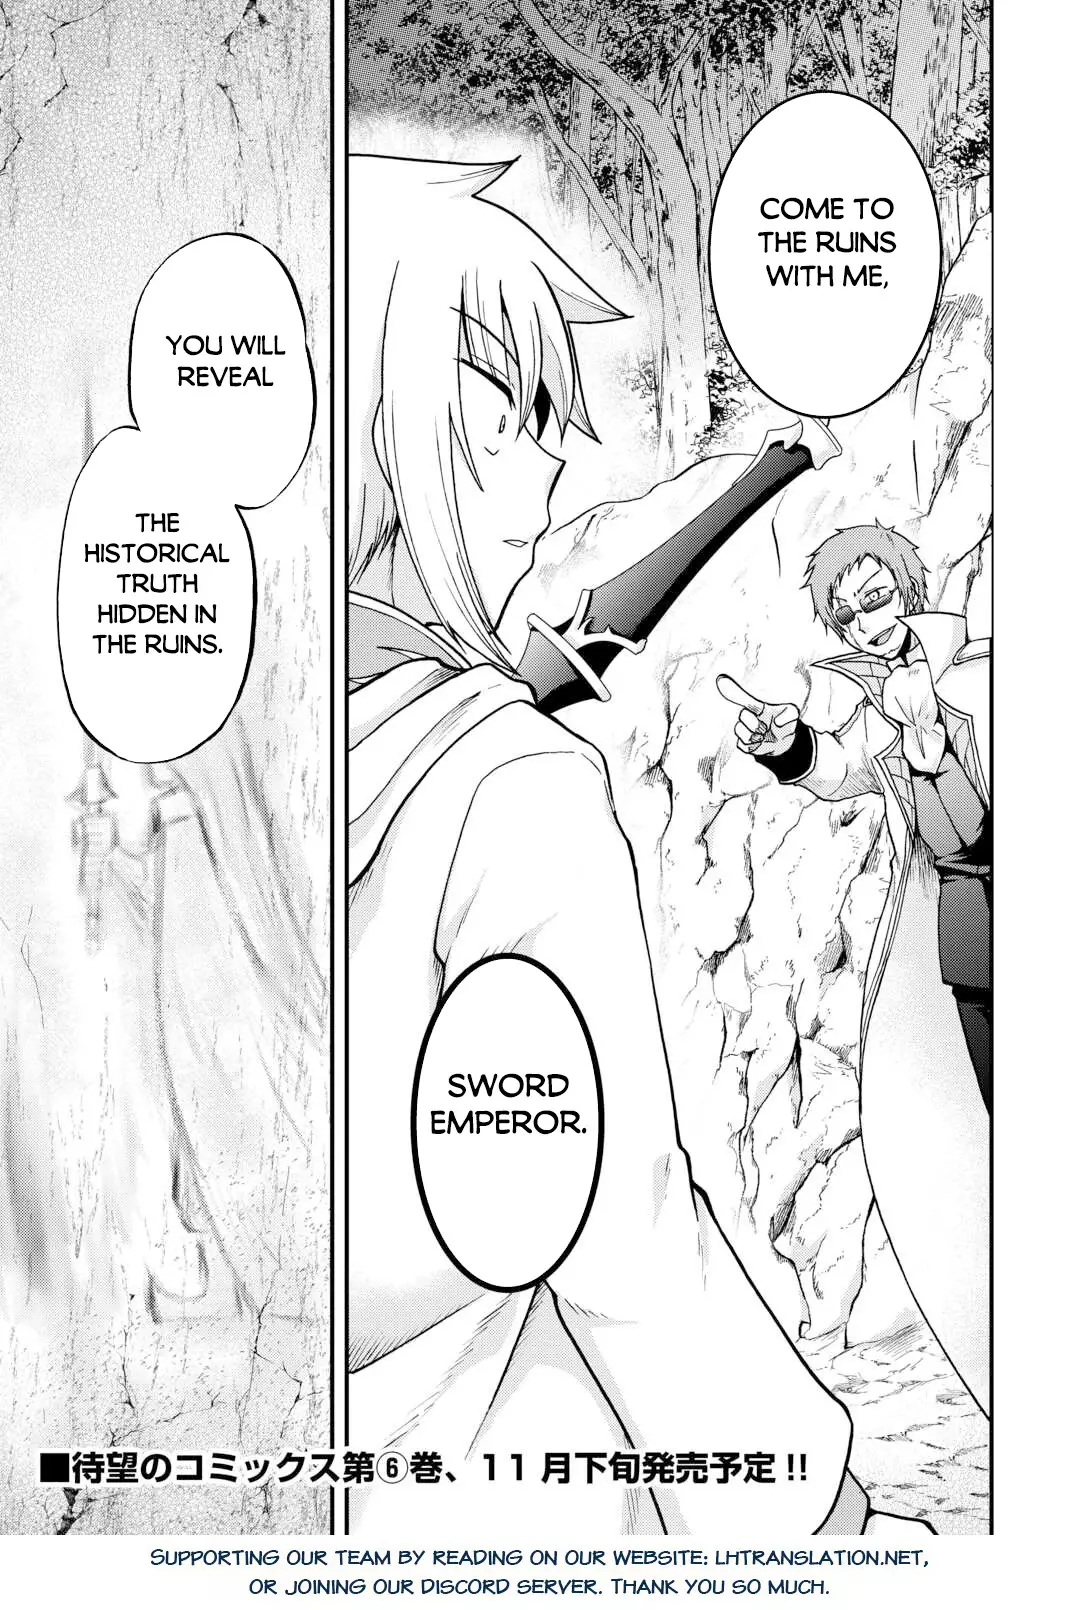 Previous Life Was Sword Emperor. This Life Is Trash Prince. - 38 page 31-961af311